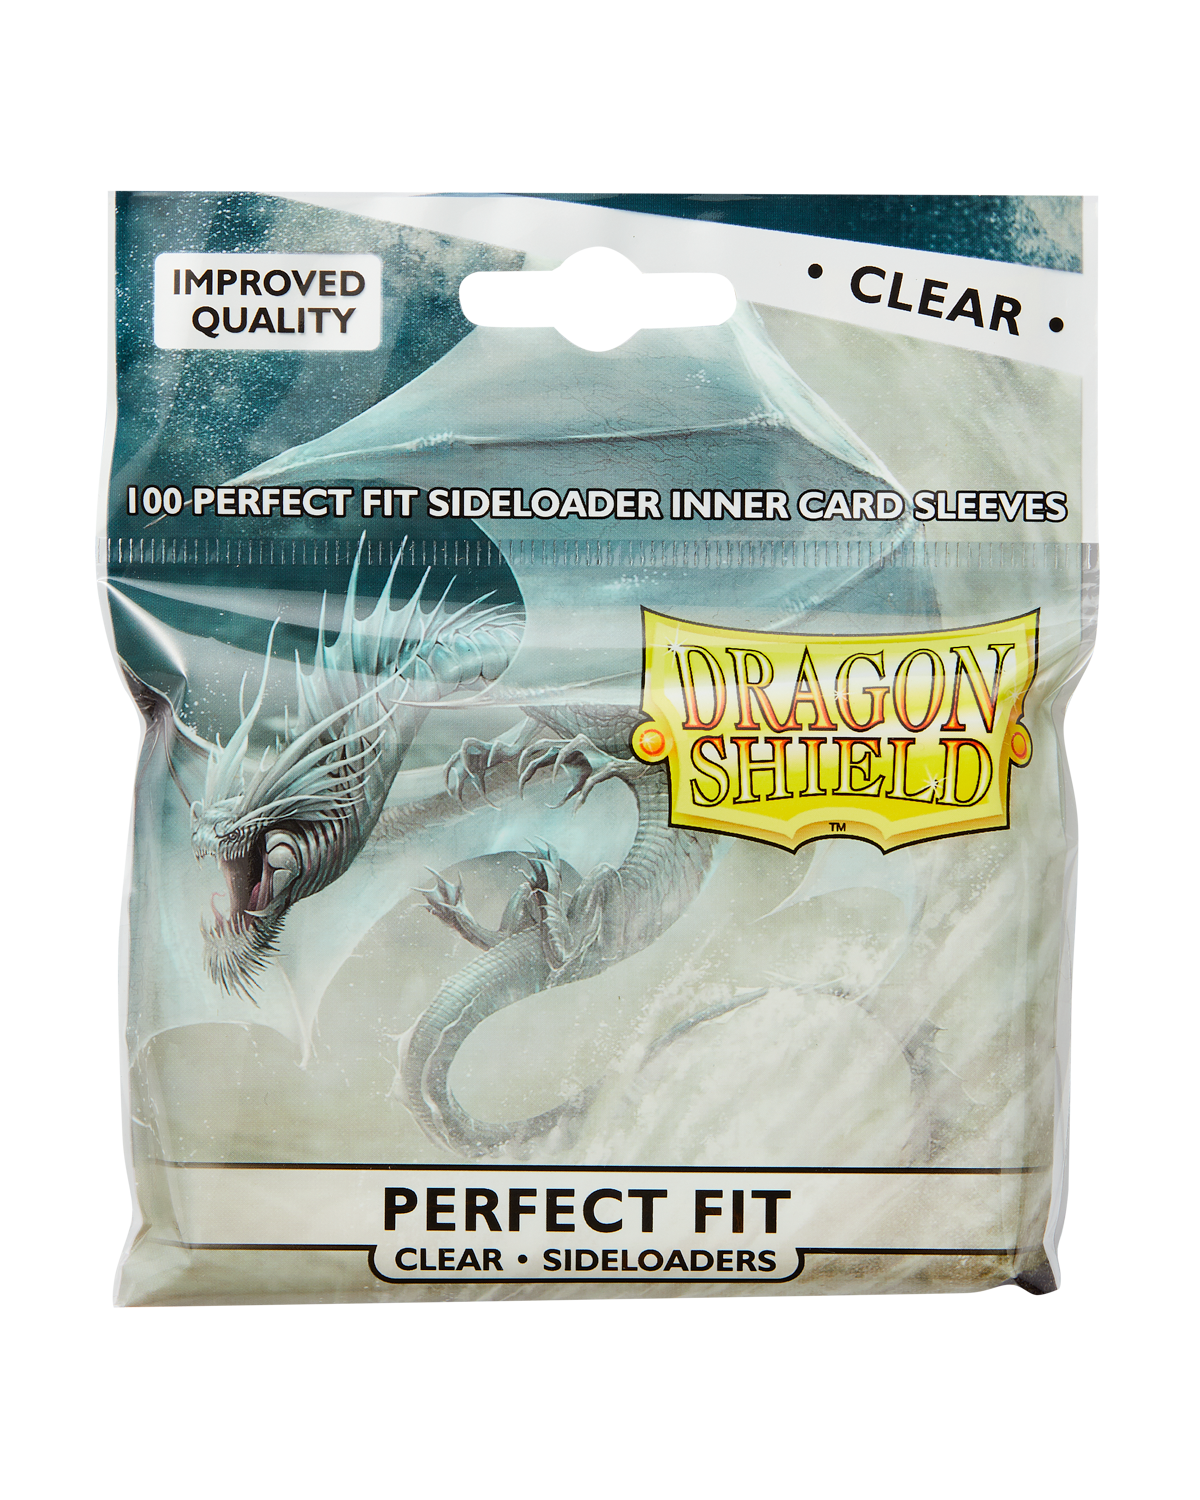  2 Packs Dragon Shield Inner Sleeve Sideloader Clear Standard  Size 100 ct Card Sleeves Individual Pack : Toys & Games